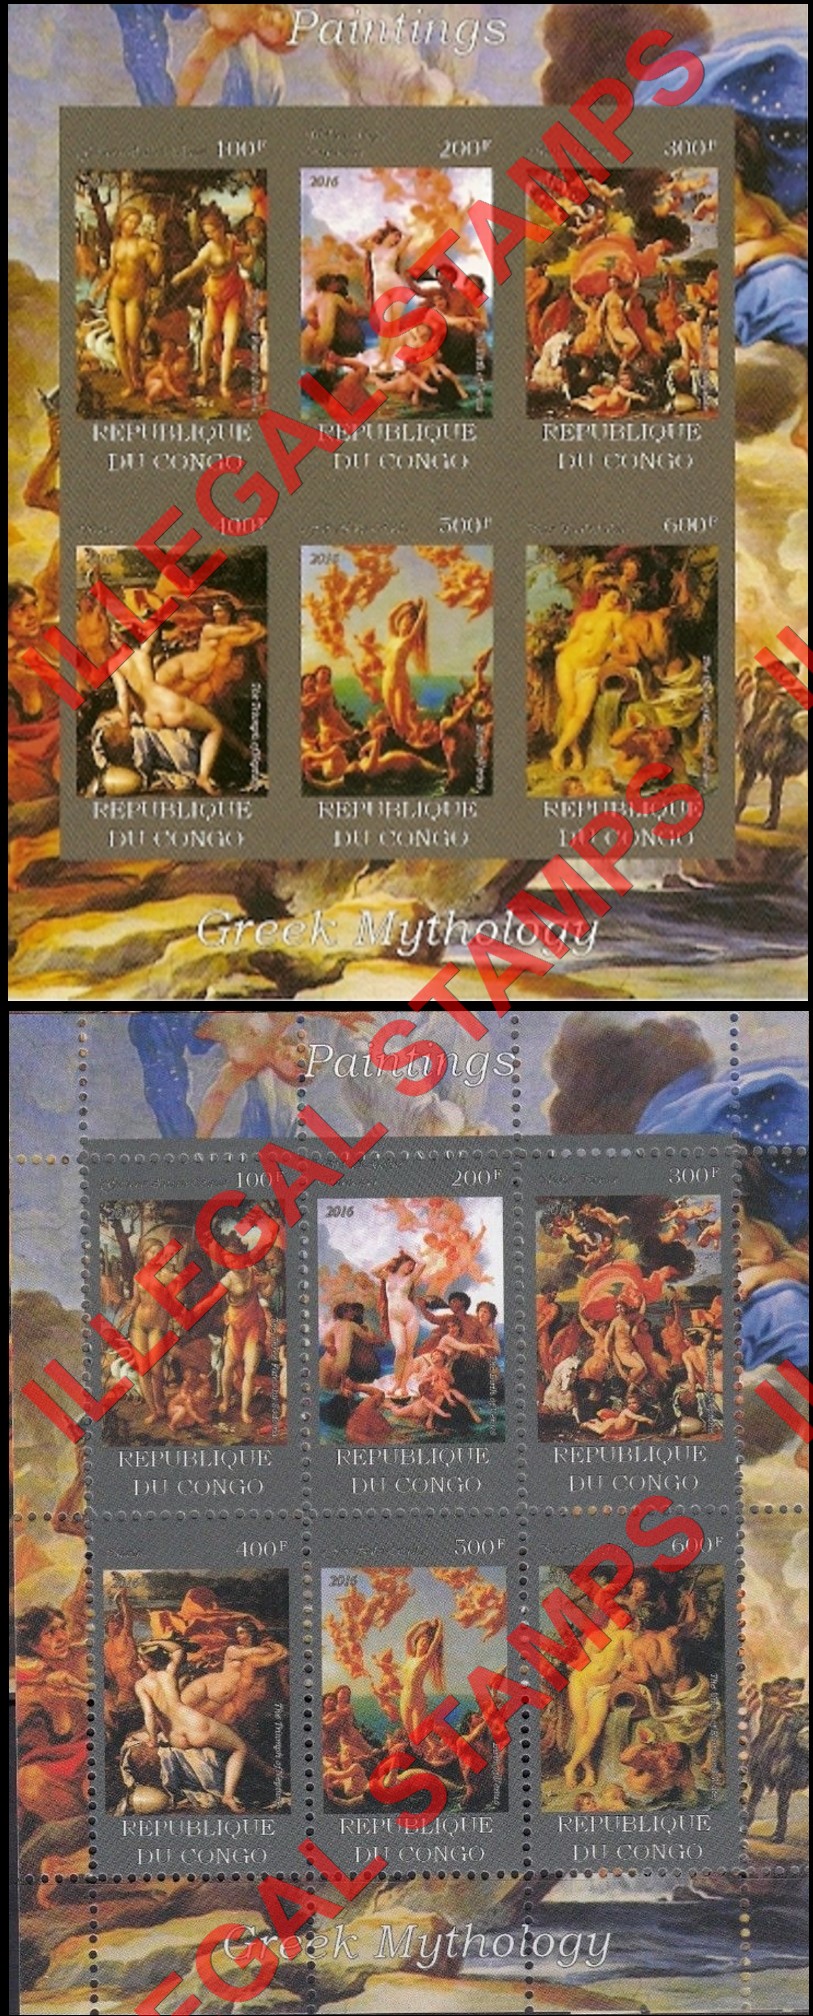 Congo Republic 2016 Paintings Greek Mythology Illegal Stamp Souvenir Sheets of 6 with Gold or Silver Borders